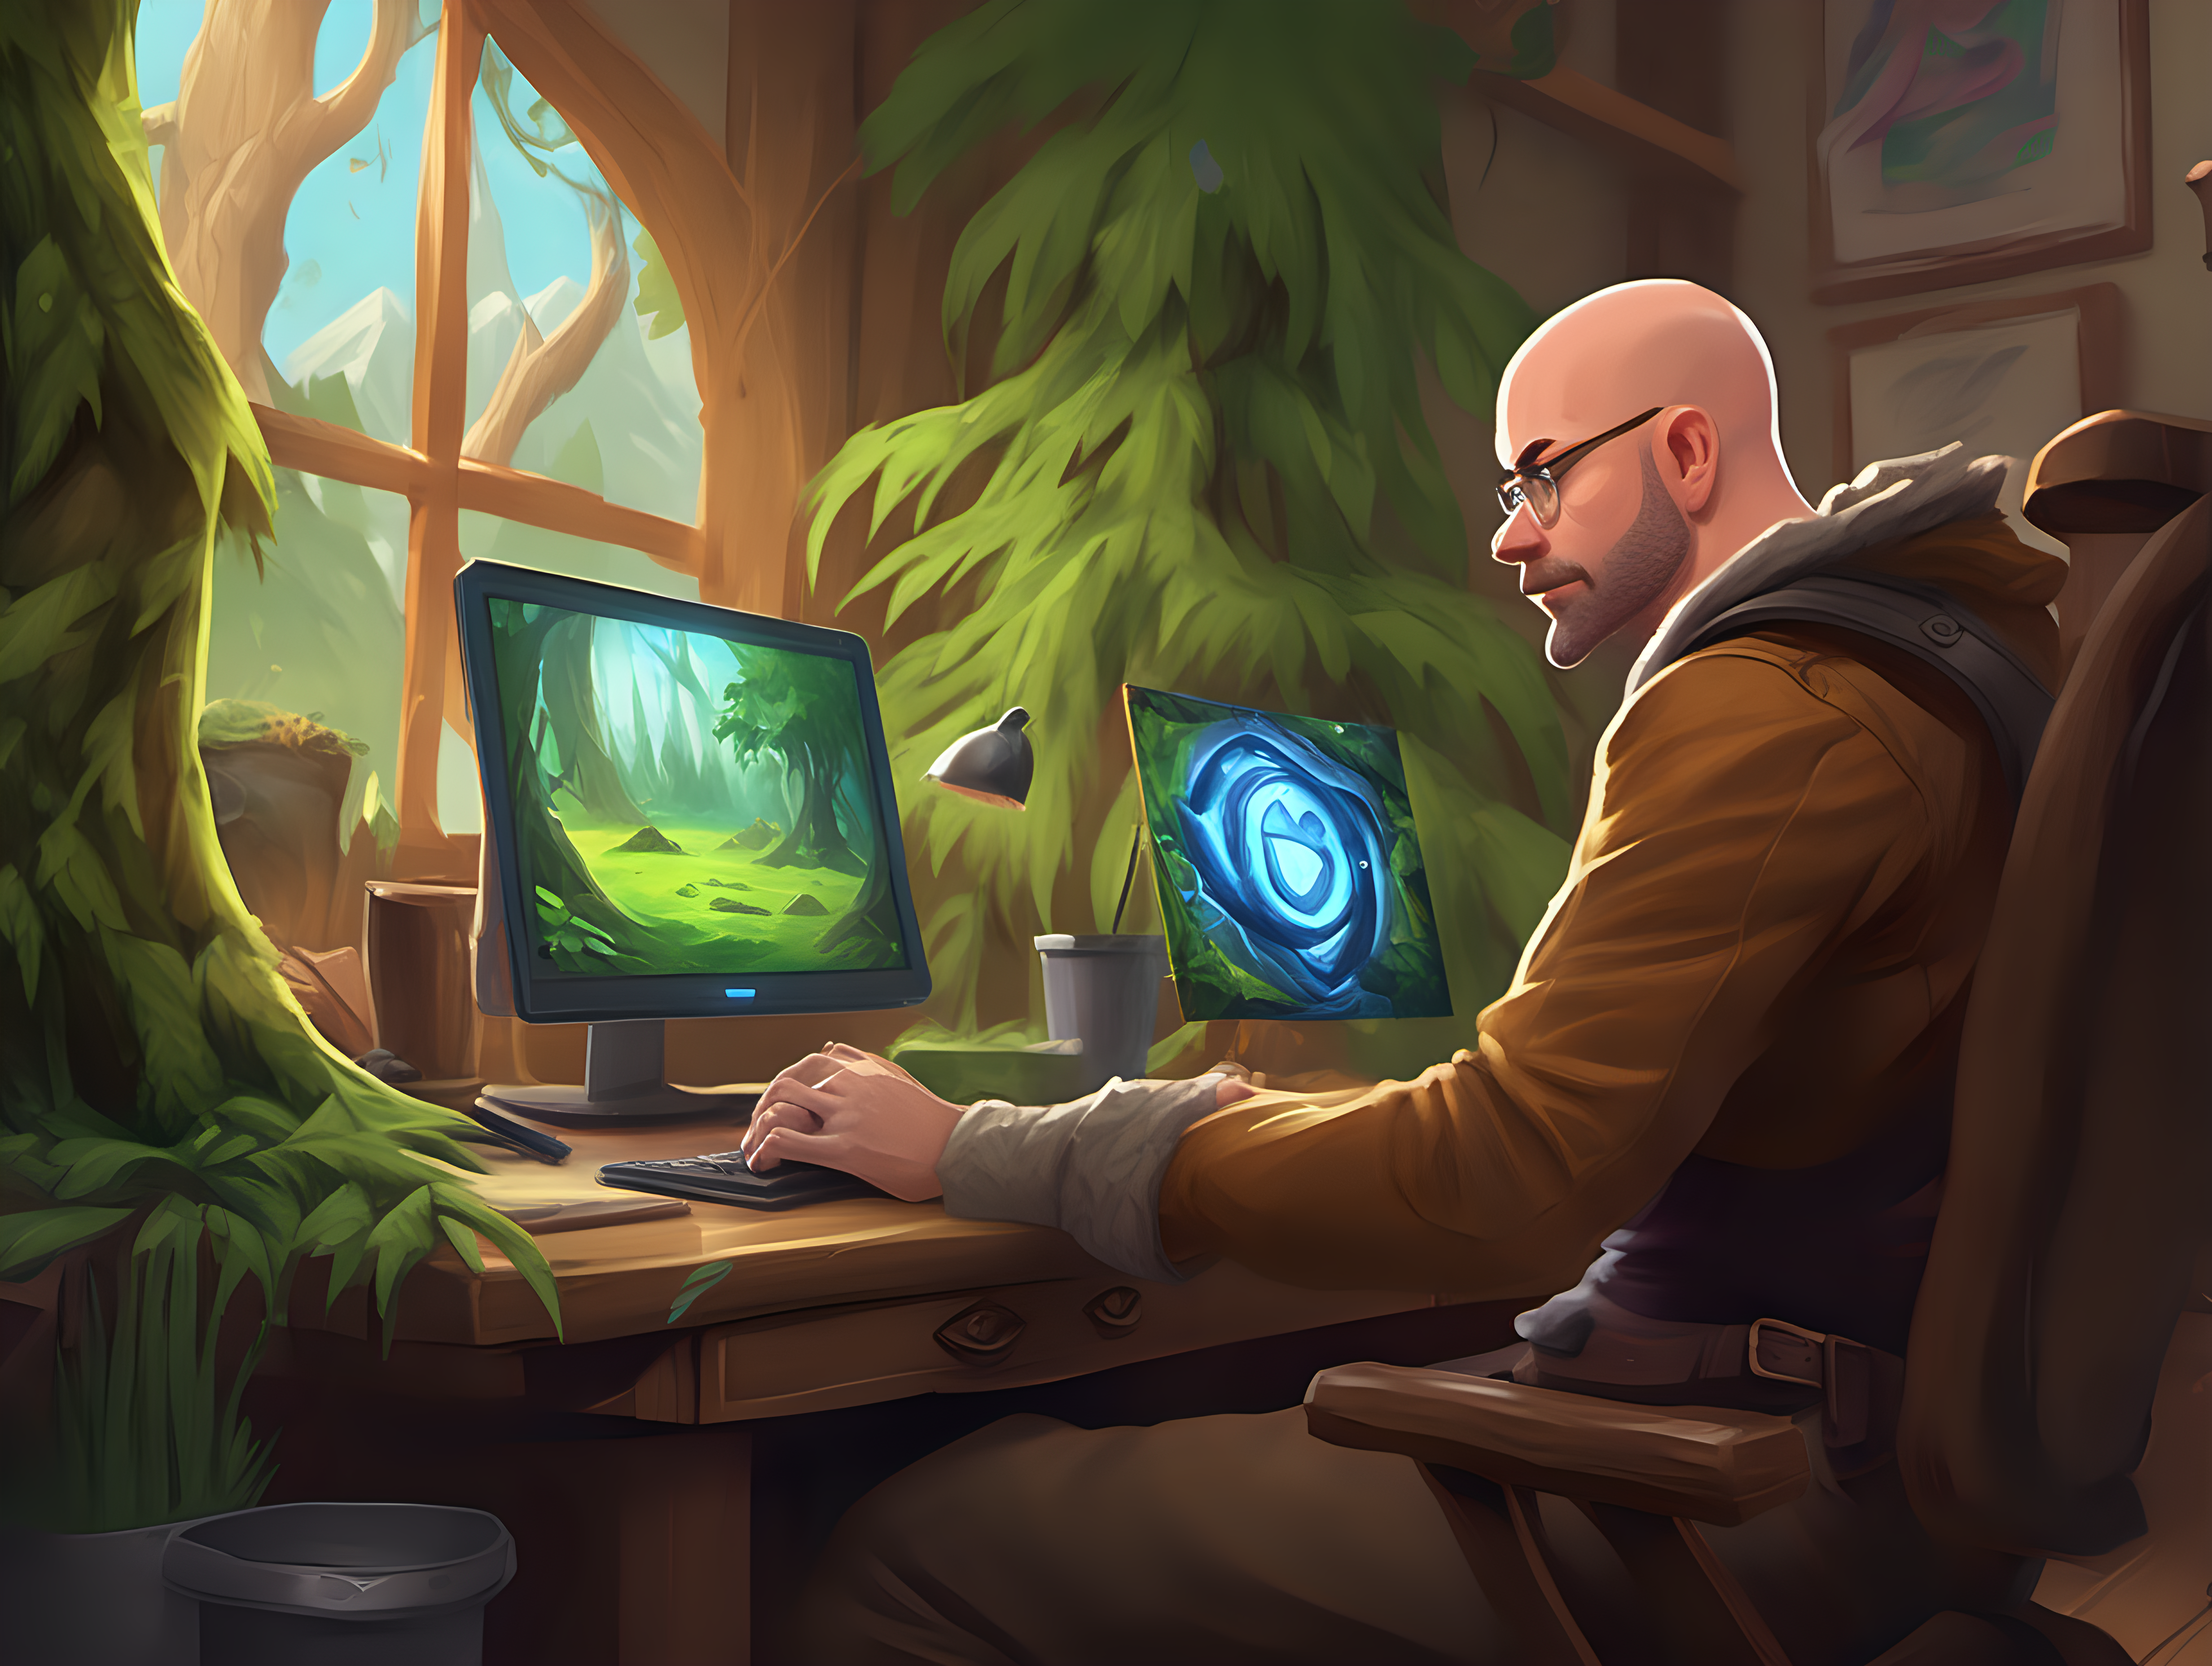 Digital art in the style of hearthstone card art. The subject is a male character on his 30s bald fade doing digital art on a wacom and monitor. The scene takes place in a office with natural elements such as things made of out of trees or grass.--v 5.3